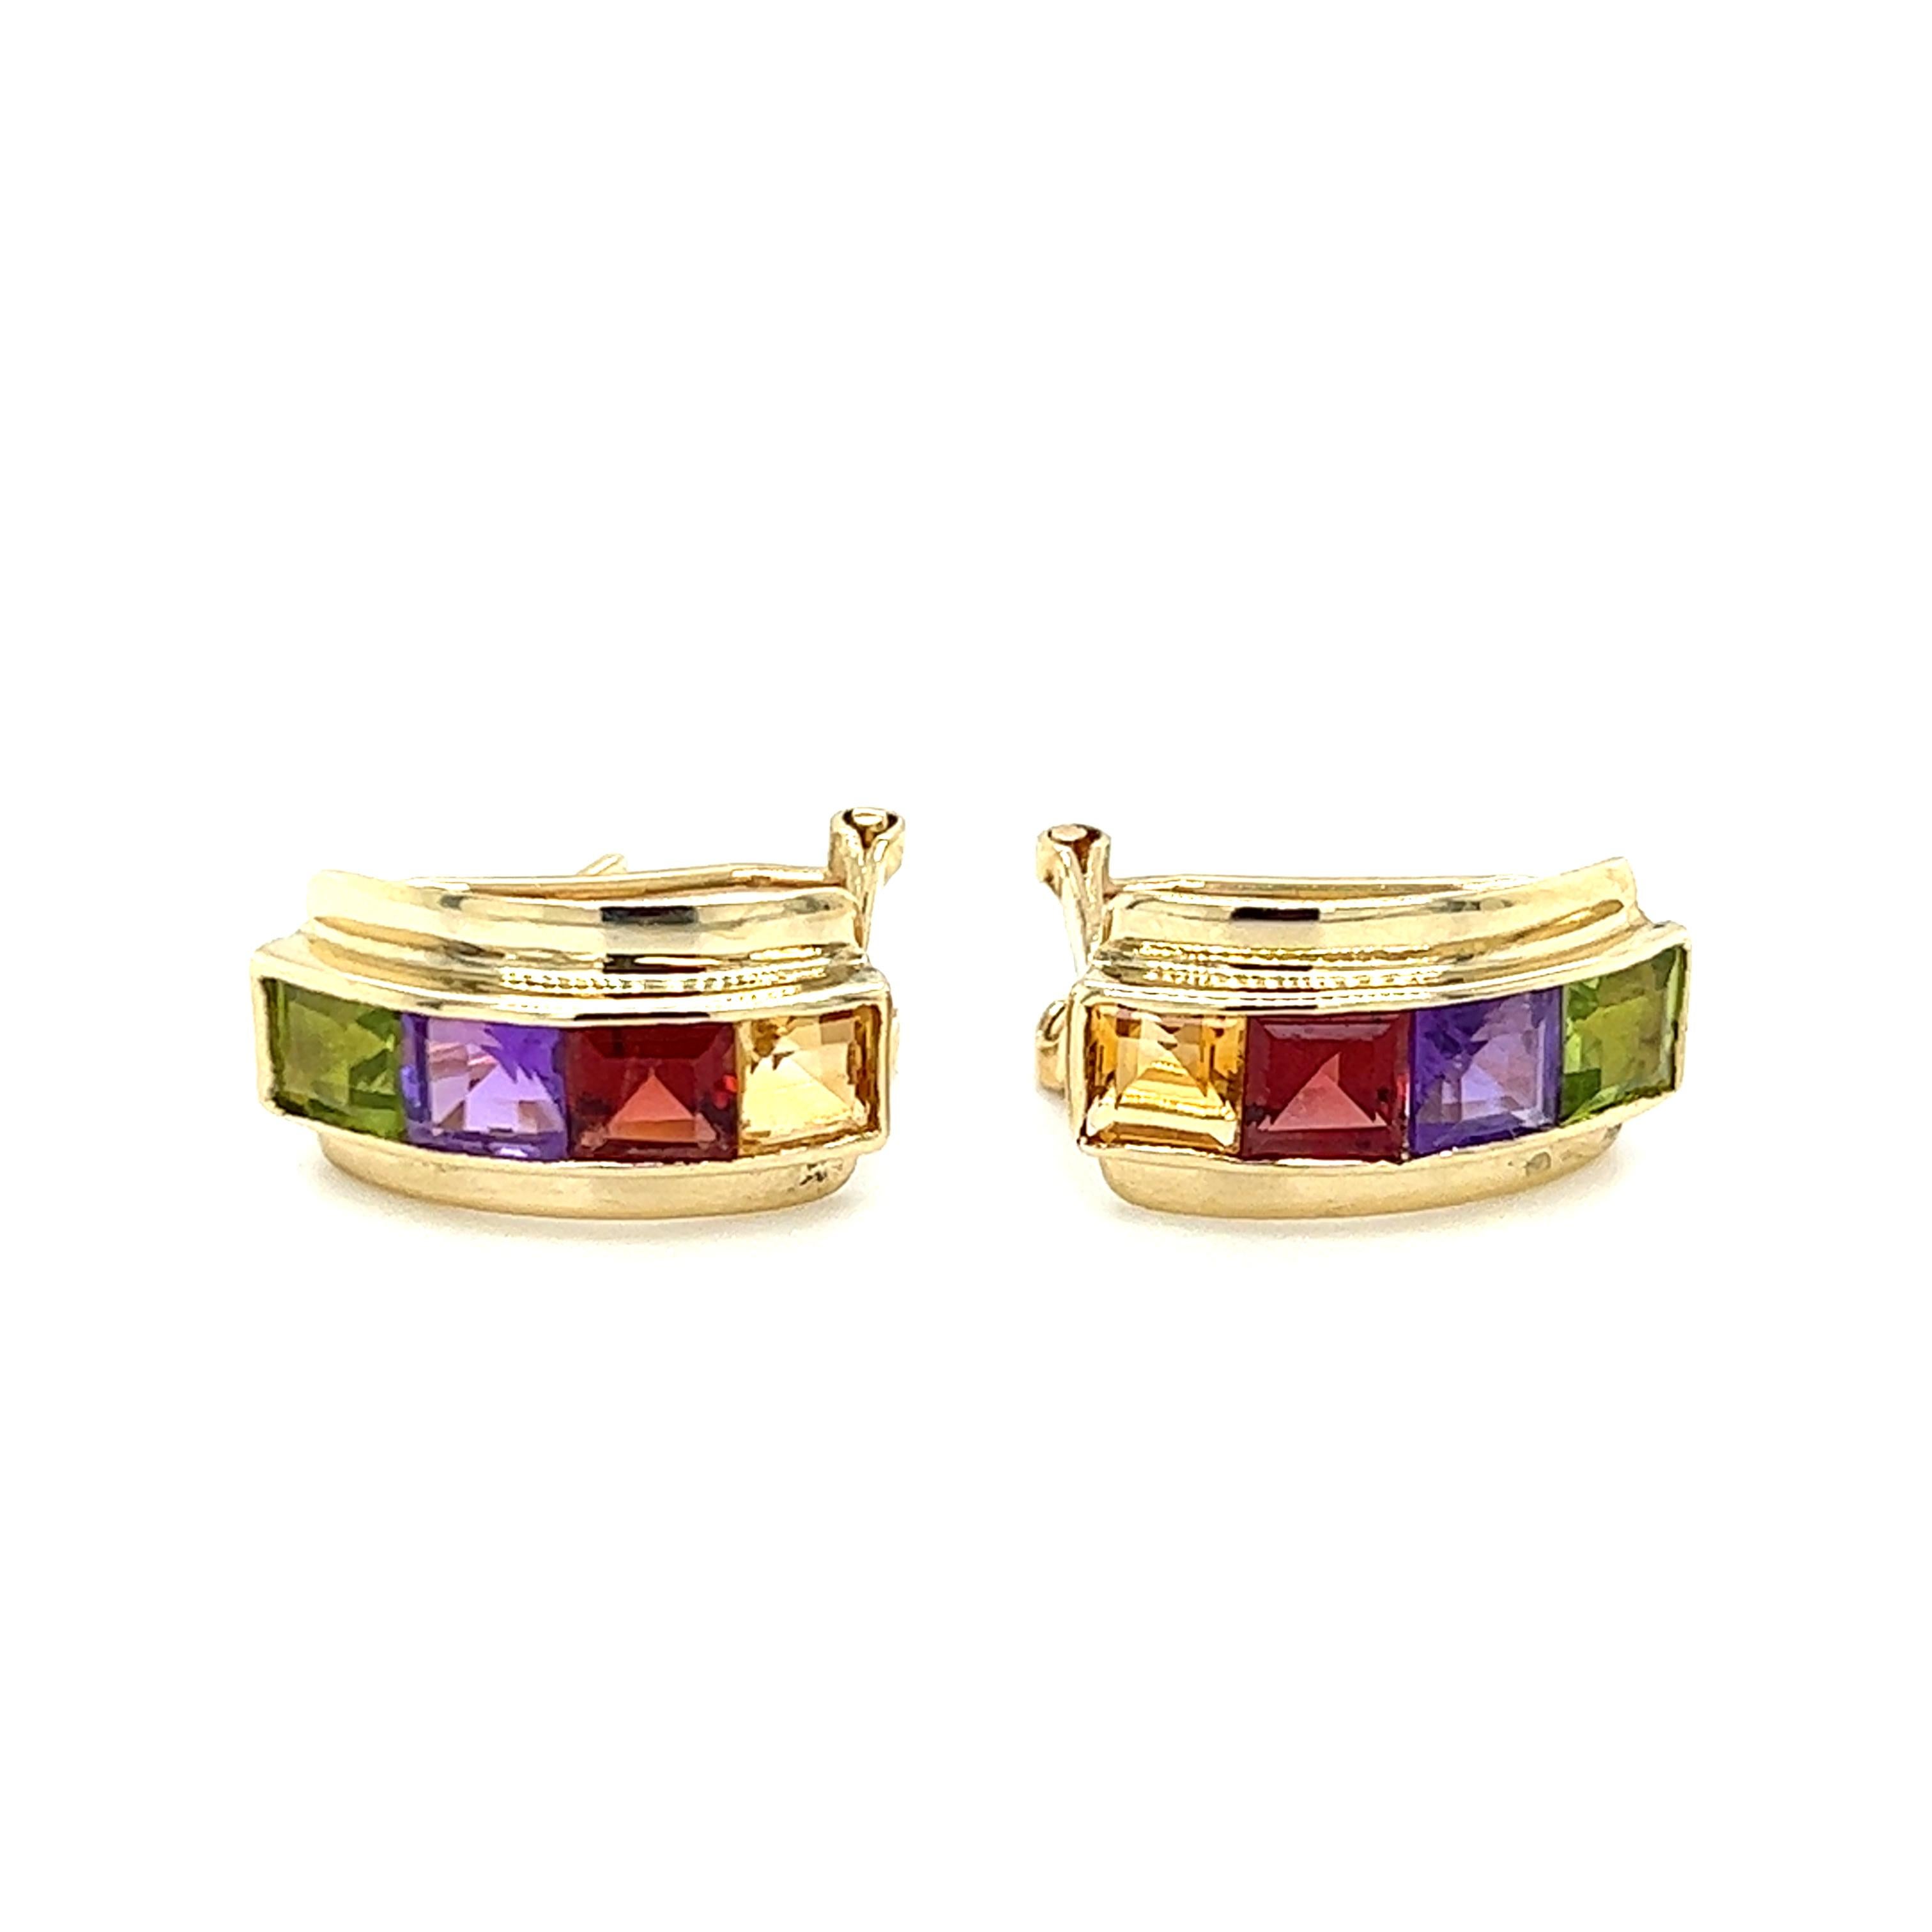 One pair of 14-karat yellow gold earrings, each set with one 4.30x3.80mm peridot, amethyst, garnet, and citrine.  The earrings measure 15.75mm long and 8.40mm wide and are complete with Omega backs.
